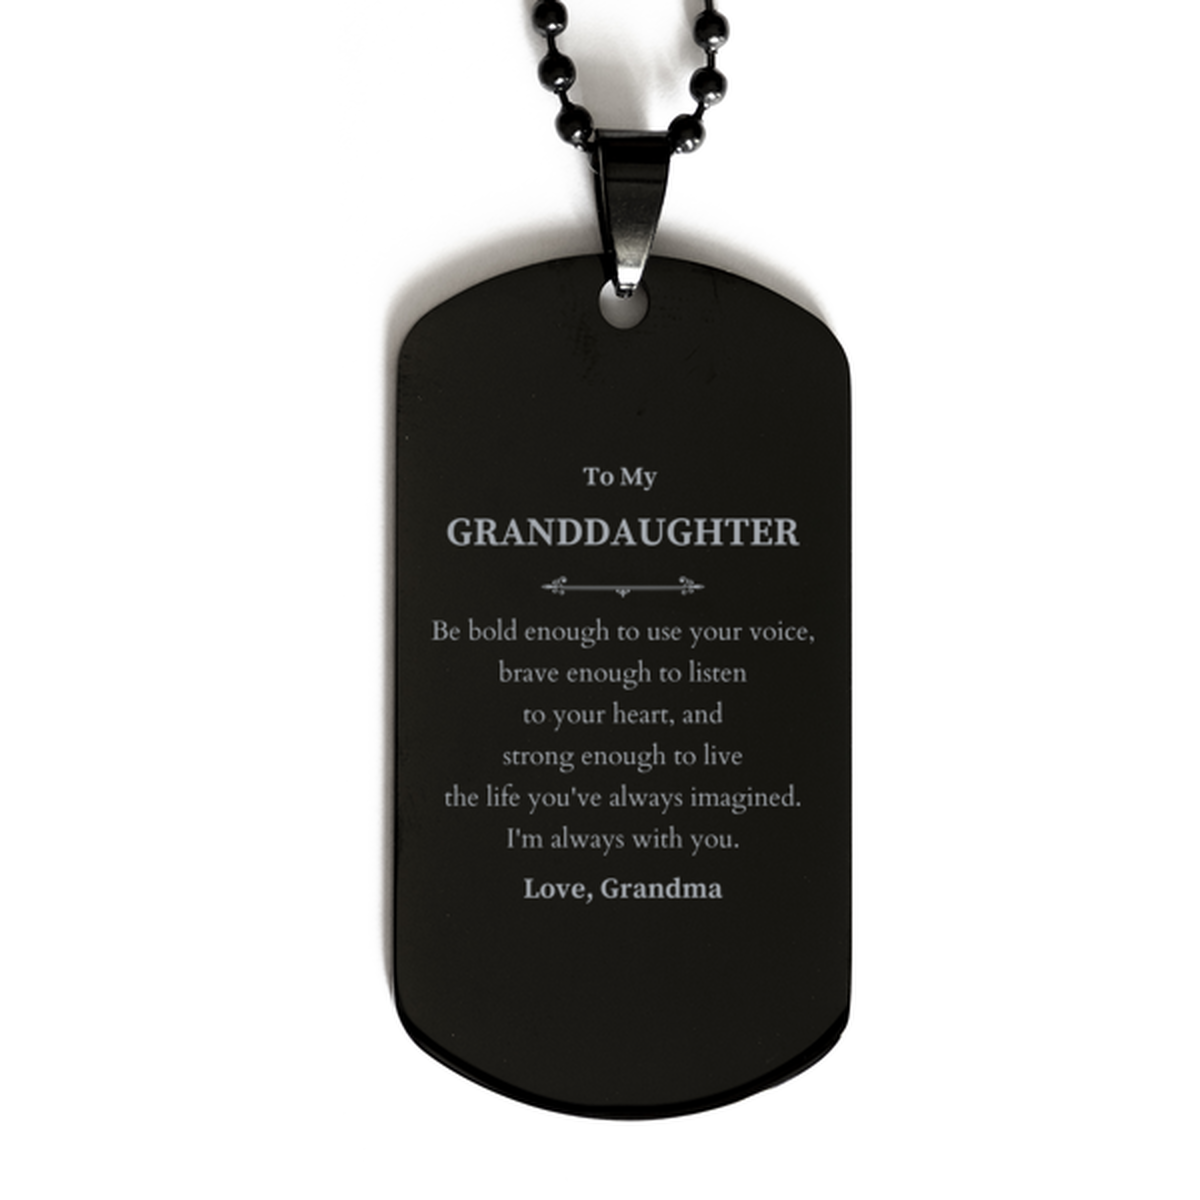 Keepsake Granddaughter Black Dog Tag Gift Idea Graduation Christmas Birthday Granddaughter from Grandma, Granddaughter Be bold enough to use your voice, brave enough to listen to your heart. Love, Grandma